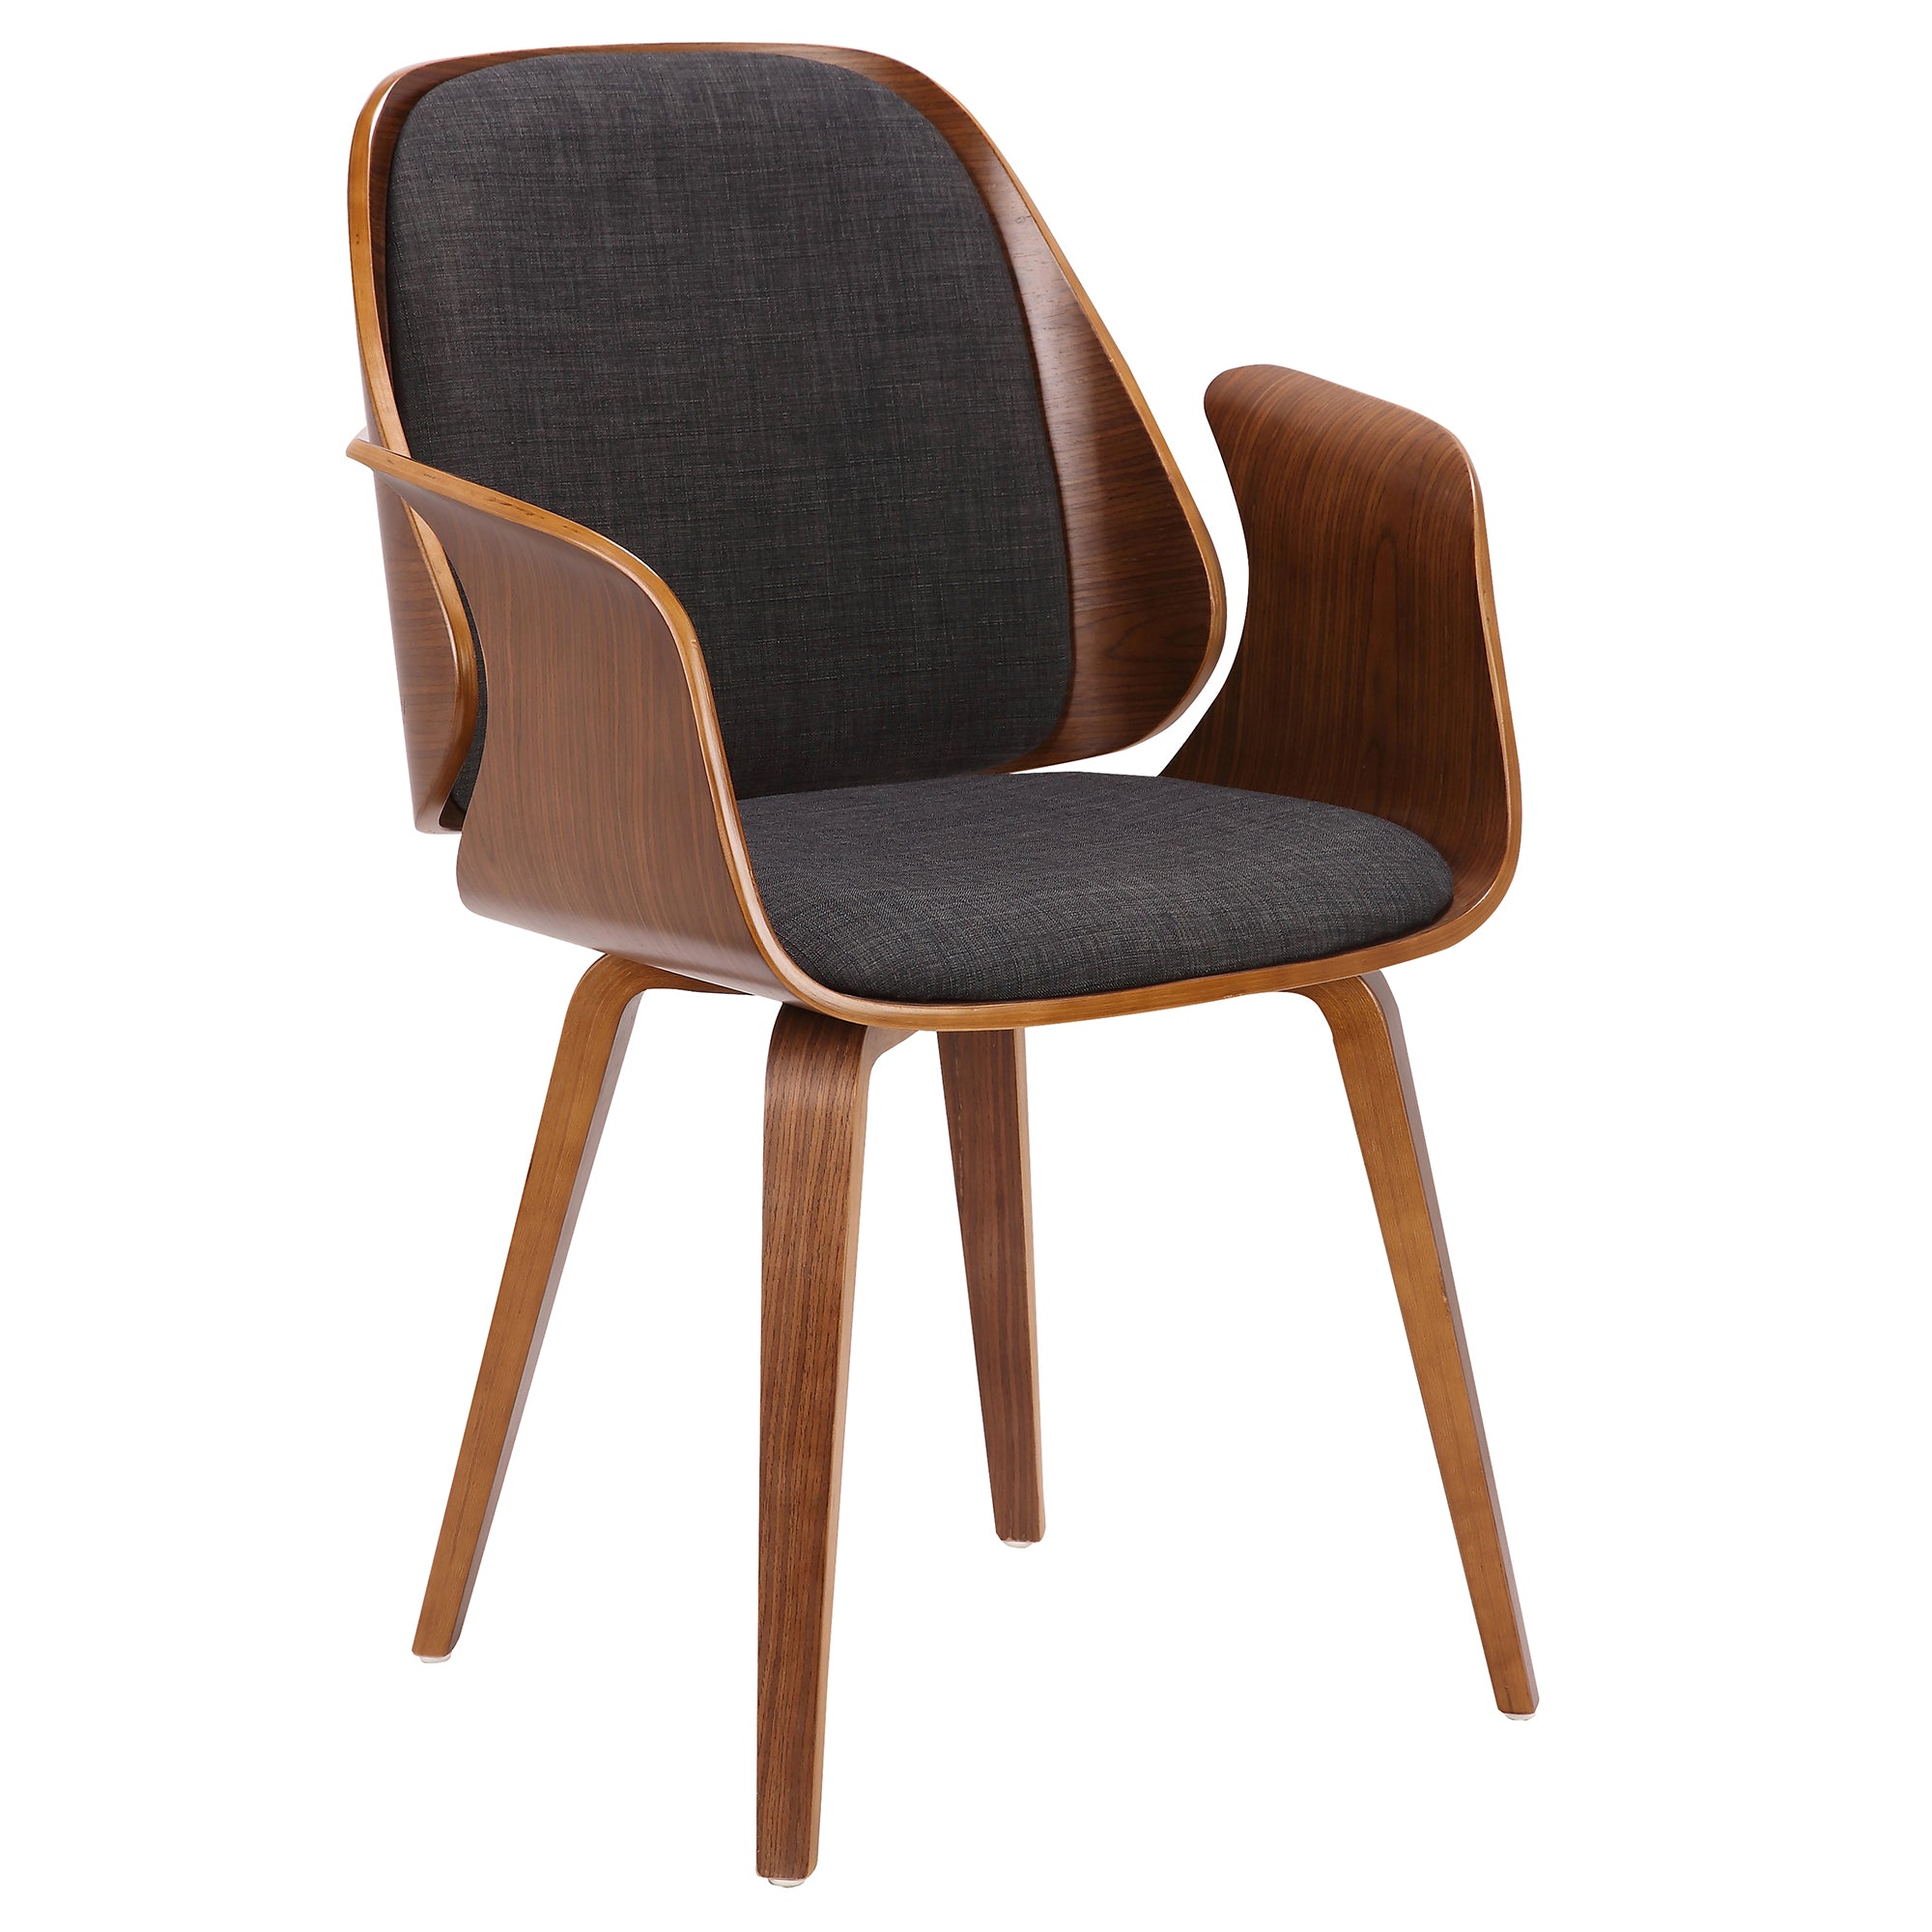 Armen Living Lctfchwach Tiffany Mid-century Dining Chair In Charcoal Fabric With Walnut Veneer Finish